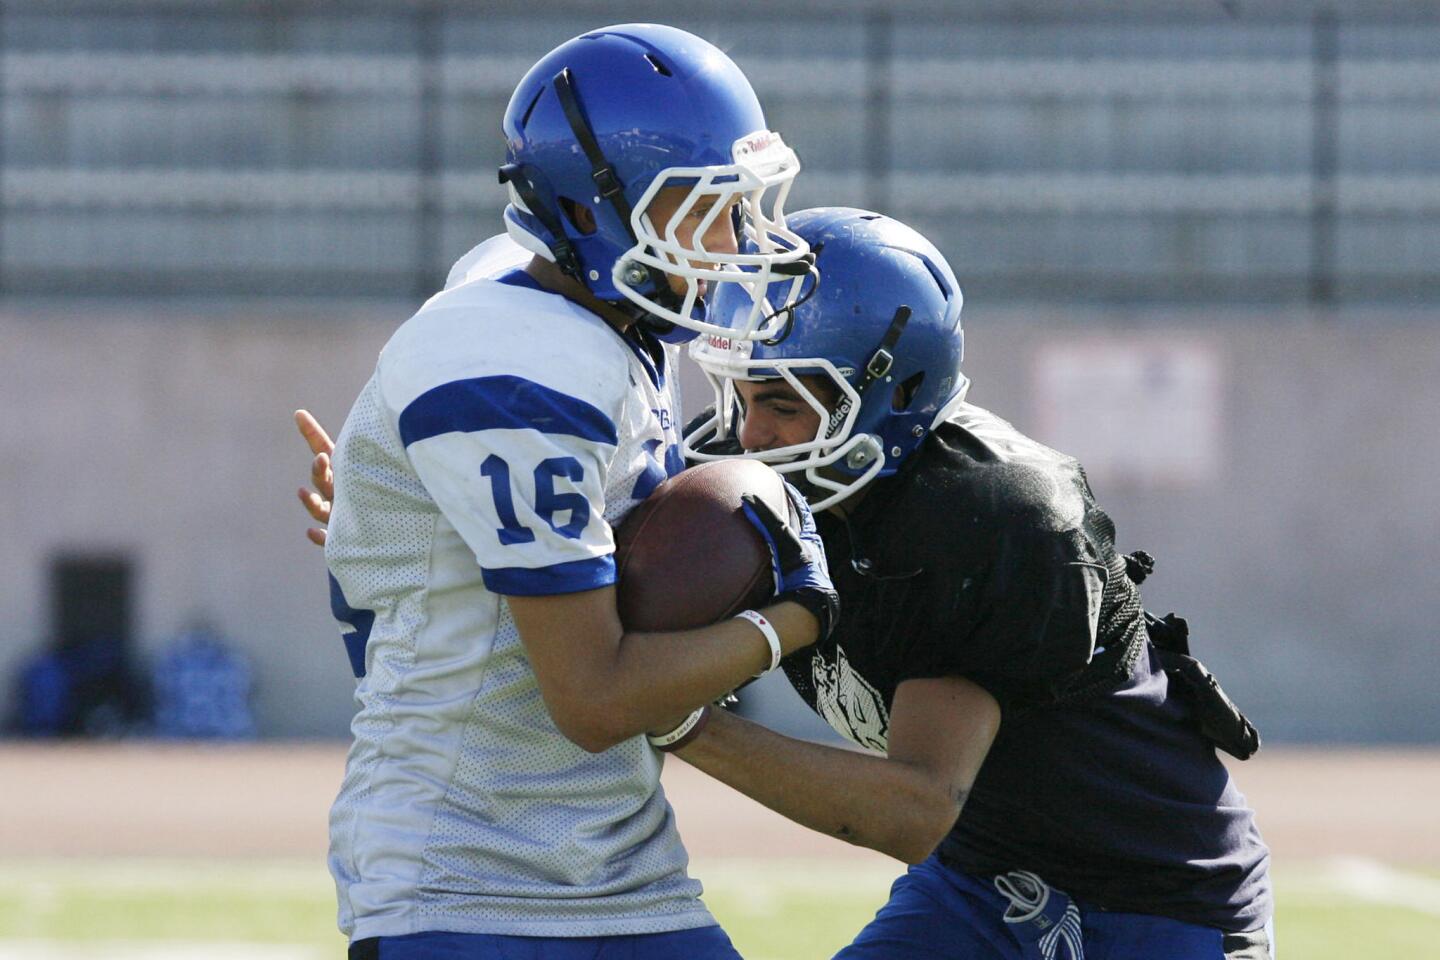 Burbank's Jacob Jimenez, left, gets tackled by Joe Argenziano during practice at Burbank High School in Burbank on Tuesday, August 14, 2012.